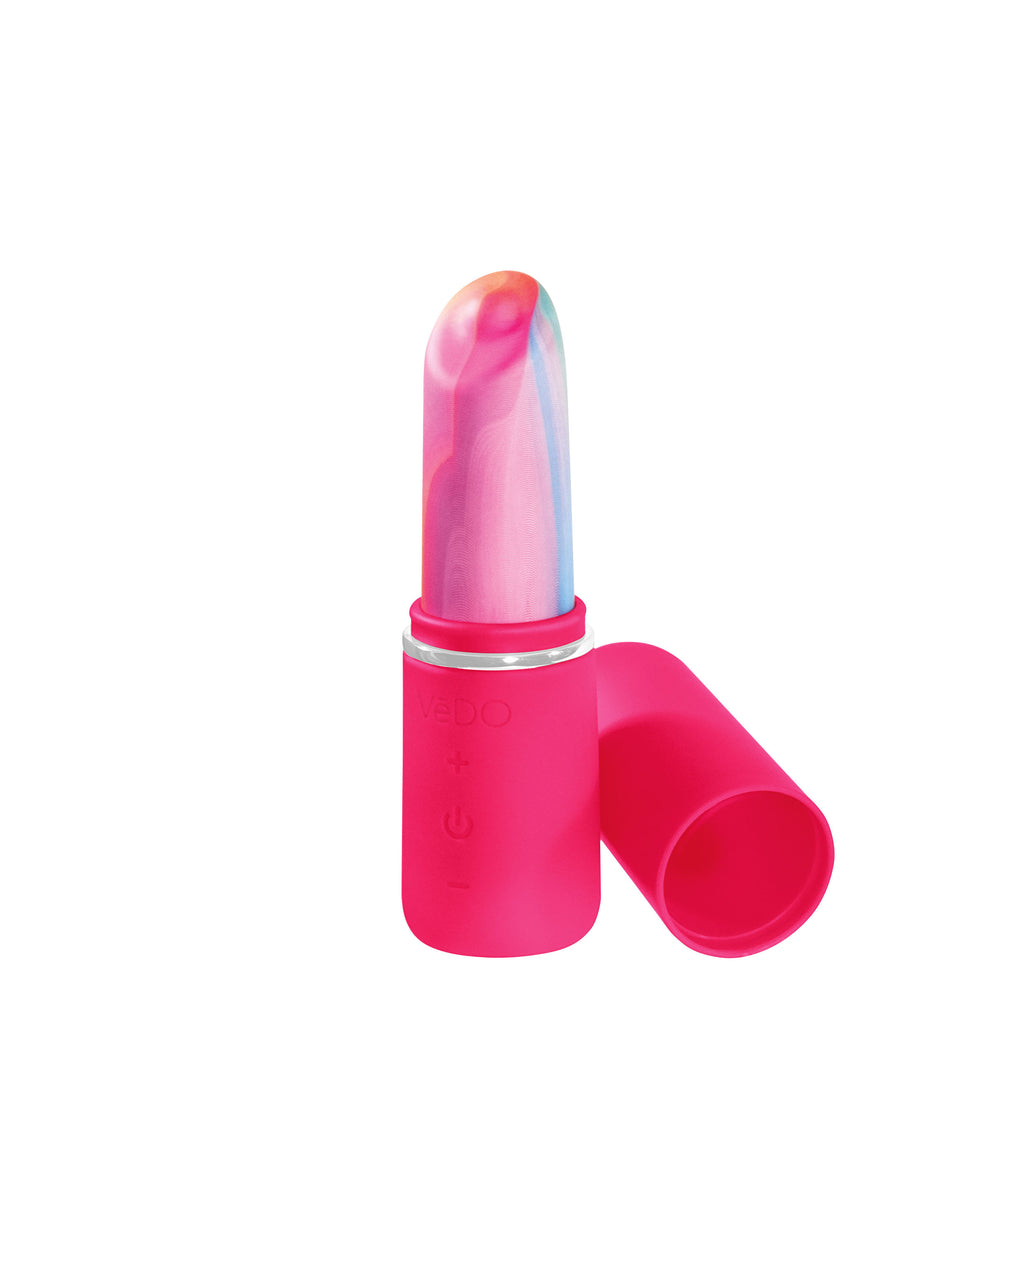 Retro Rechargeable Bullet - Pink VI-F1809